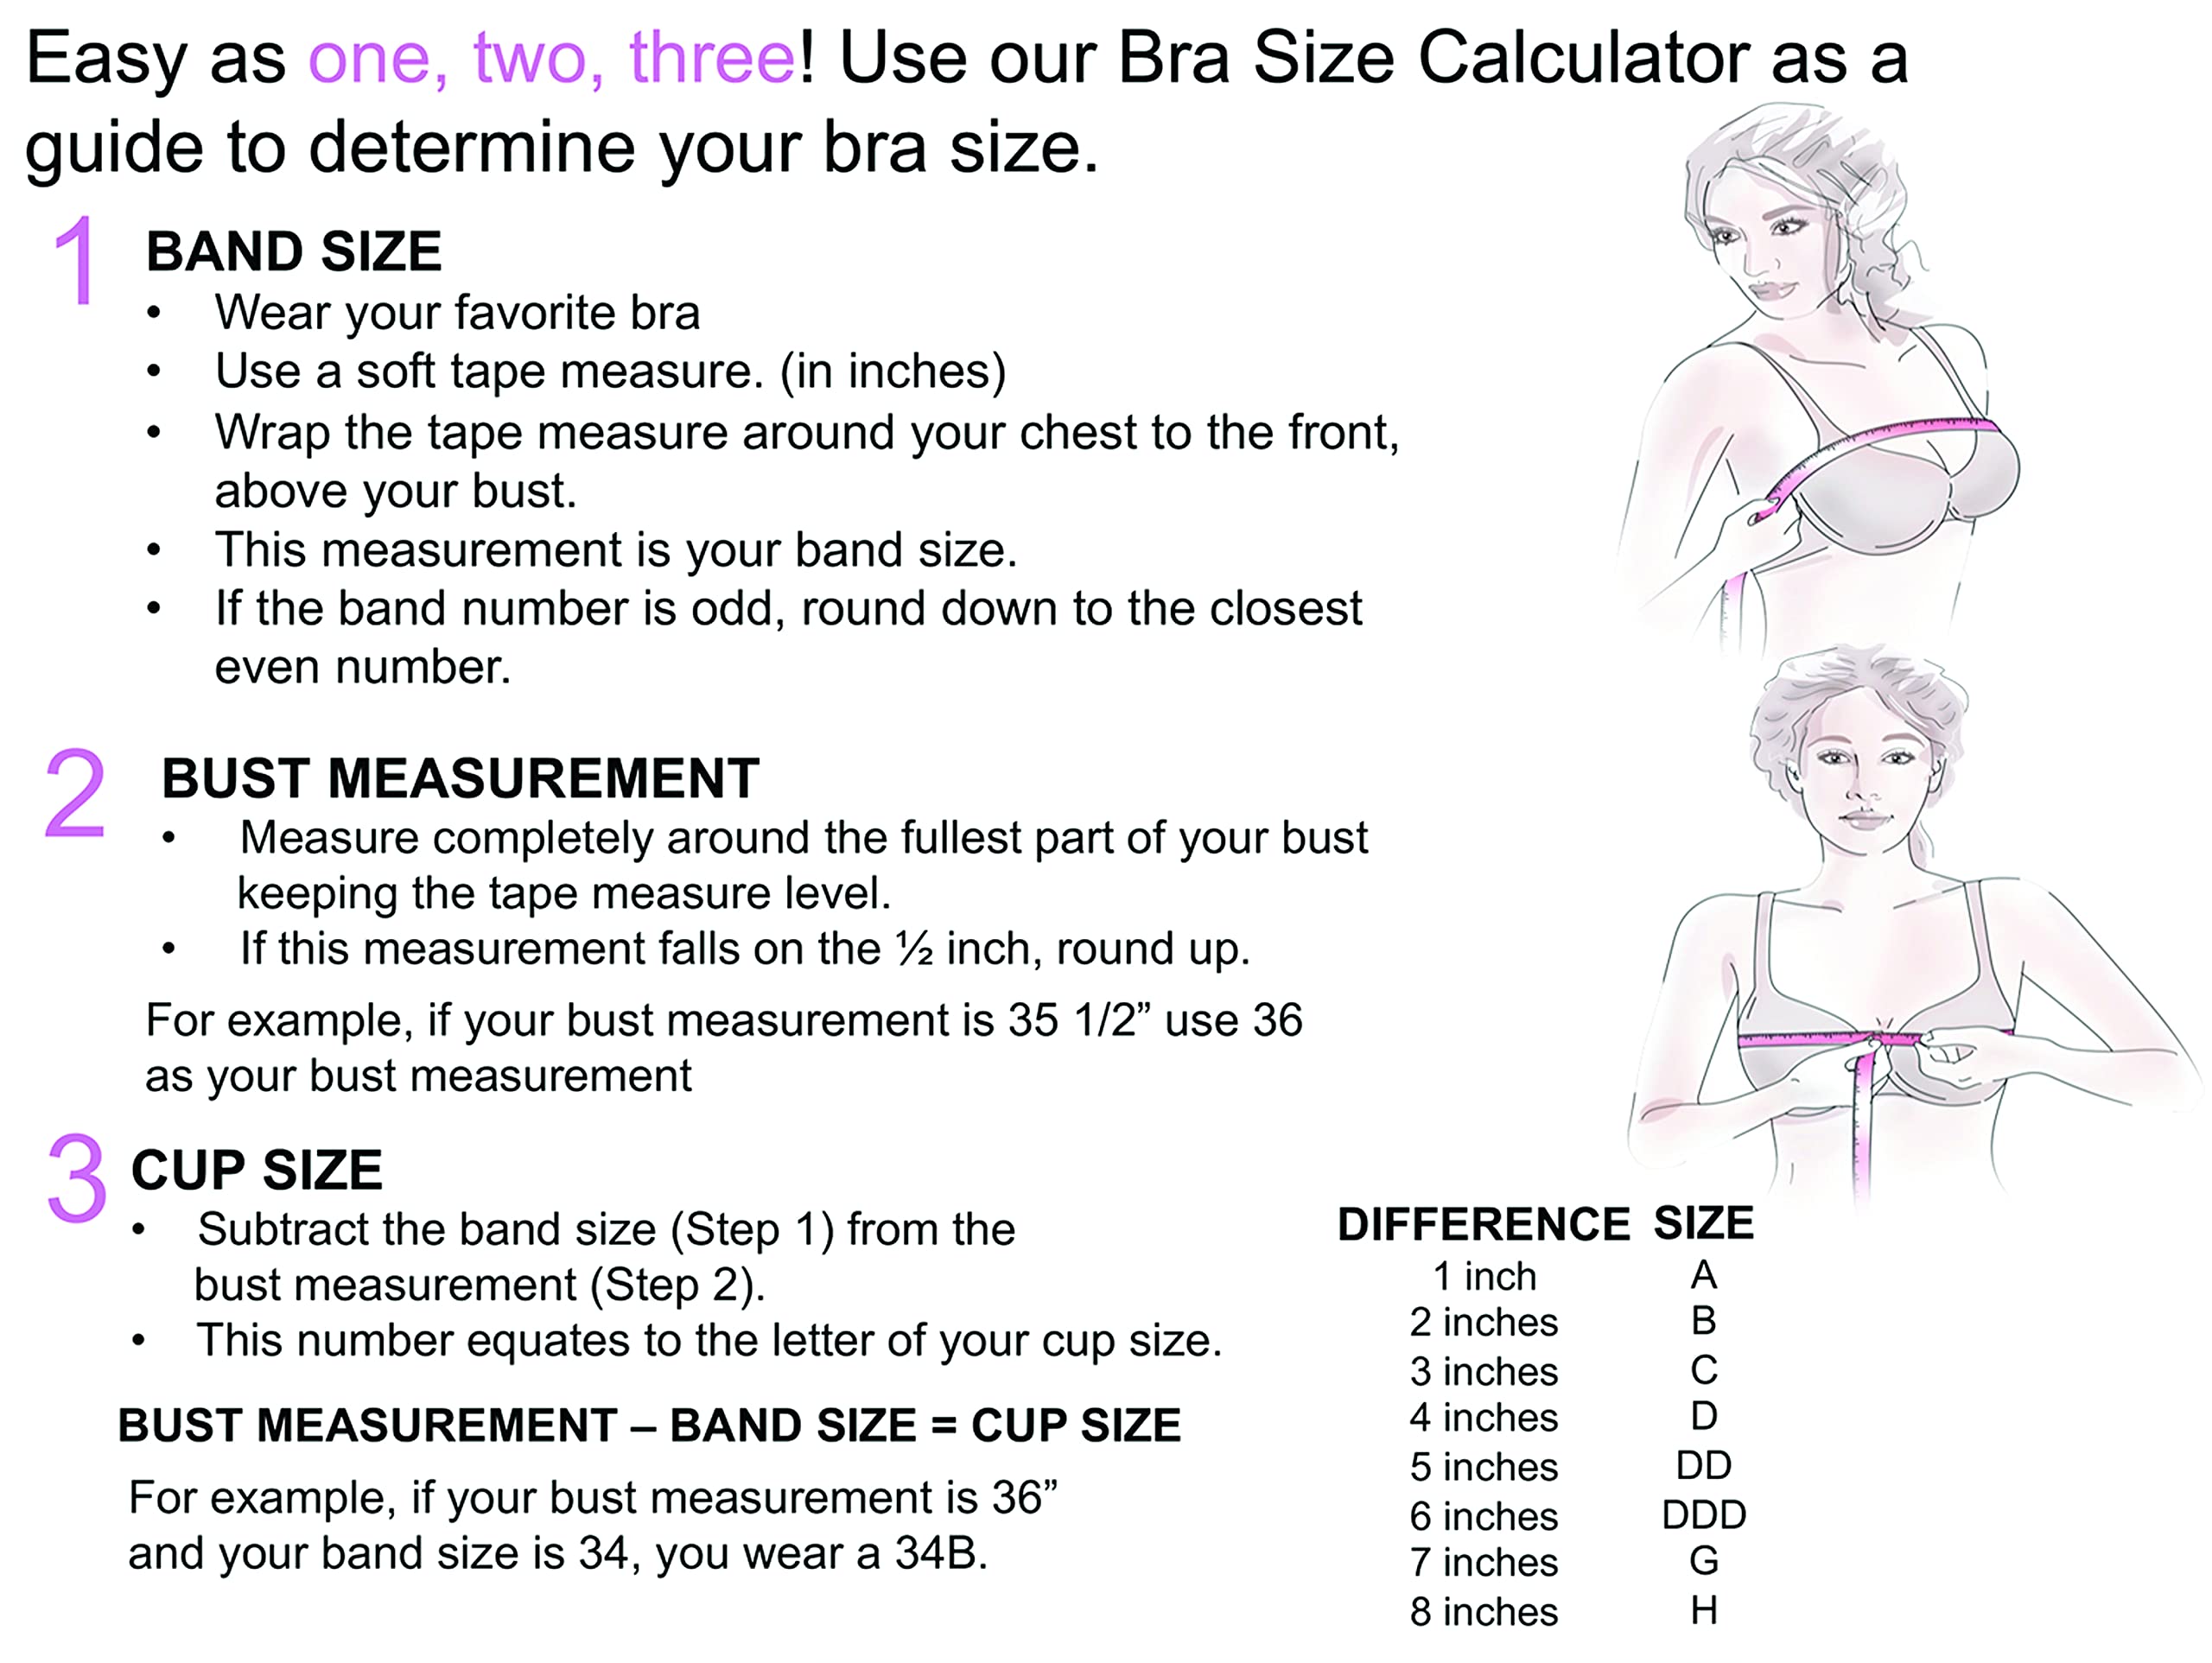 Bali Double Support Wireless Bra, Lace Bra with Stay-in-Place Straps, Full-Coverage Wirefree Bra, Tagless for Everyday Wear